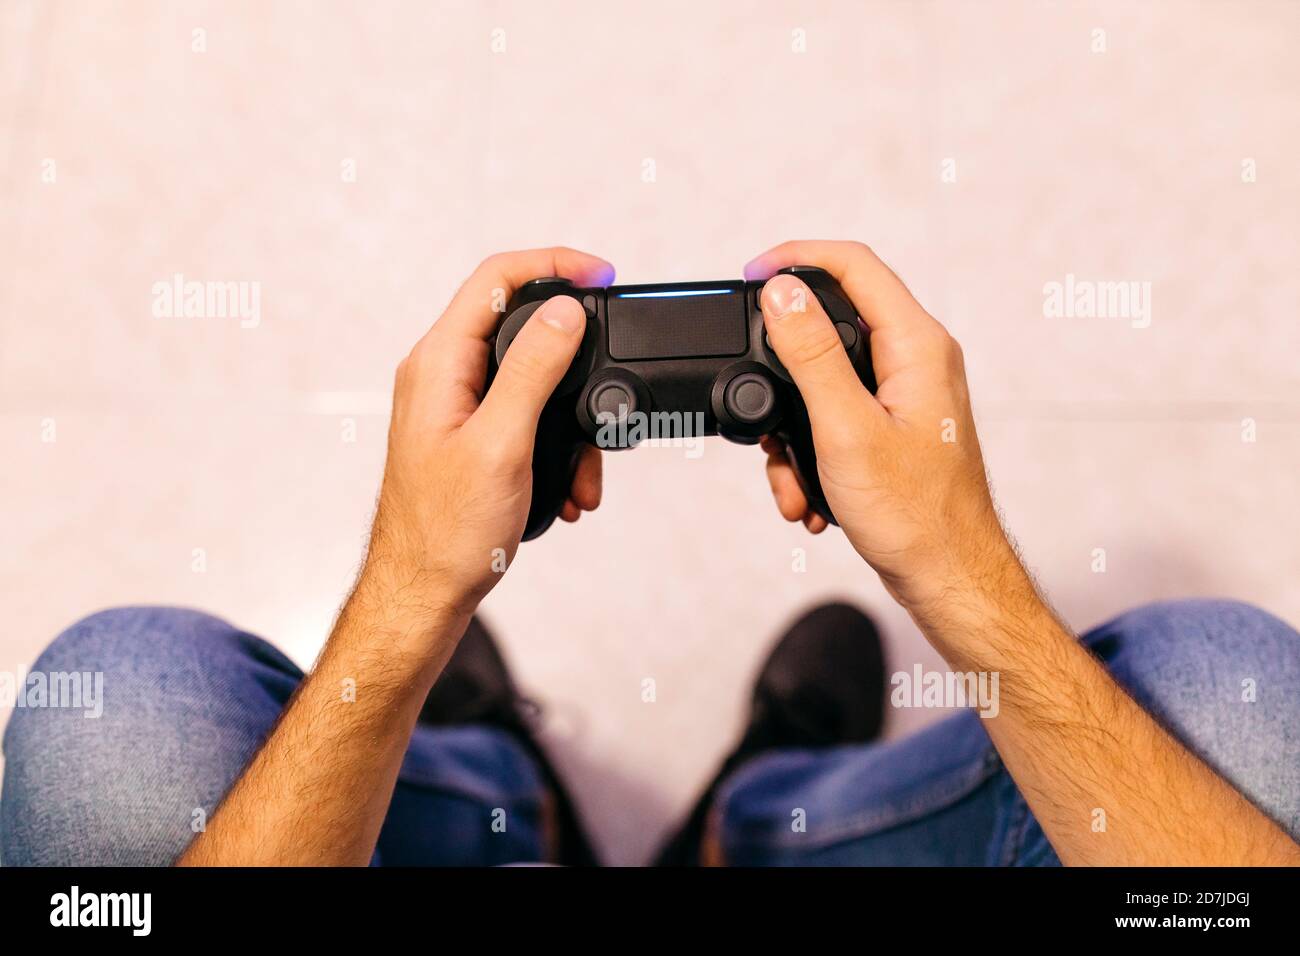 Gamer Life Stock Photos and Pictures - 8,534 Images